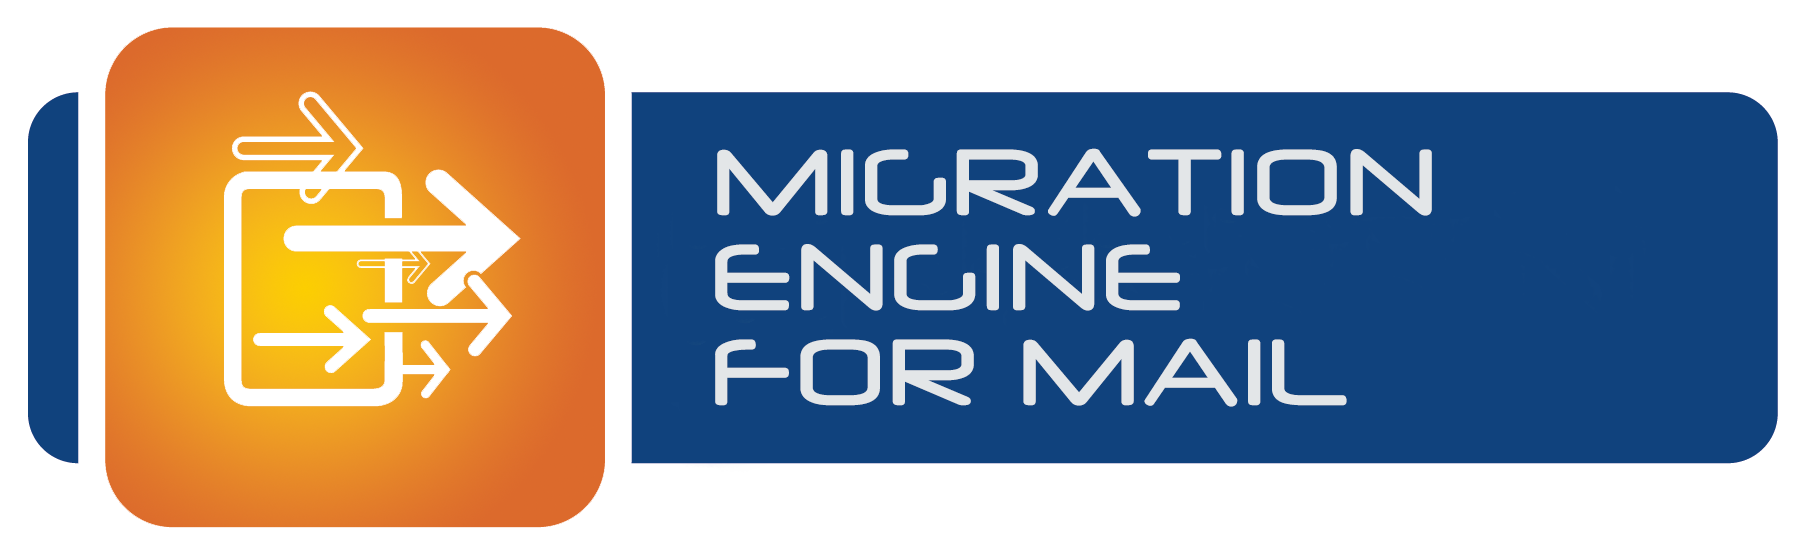 BCC MigrationEngine for Mail product logo